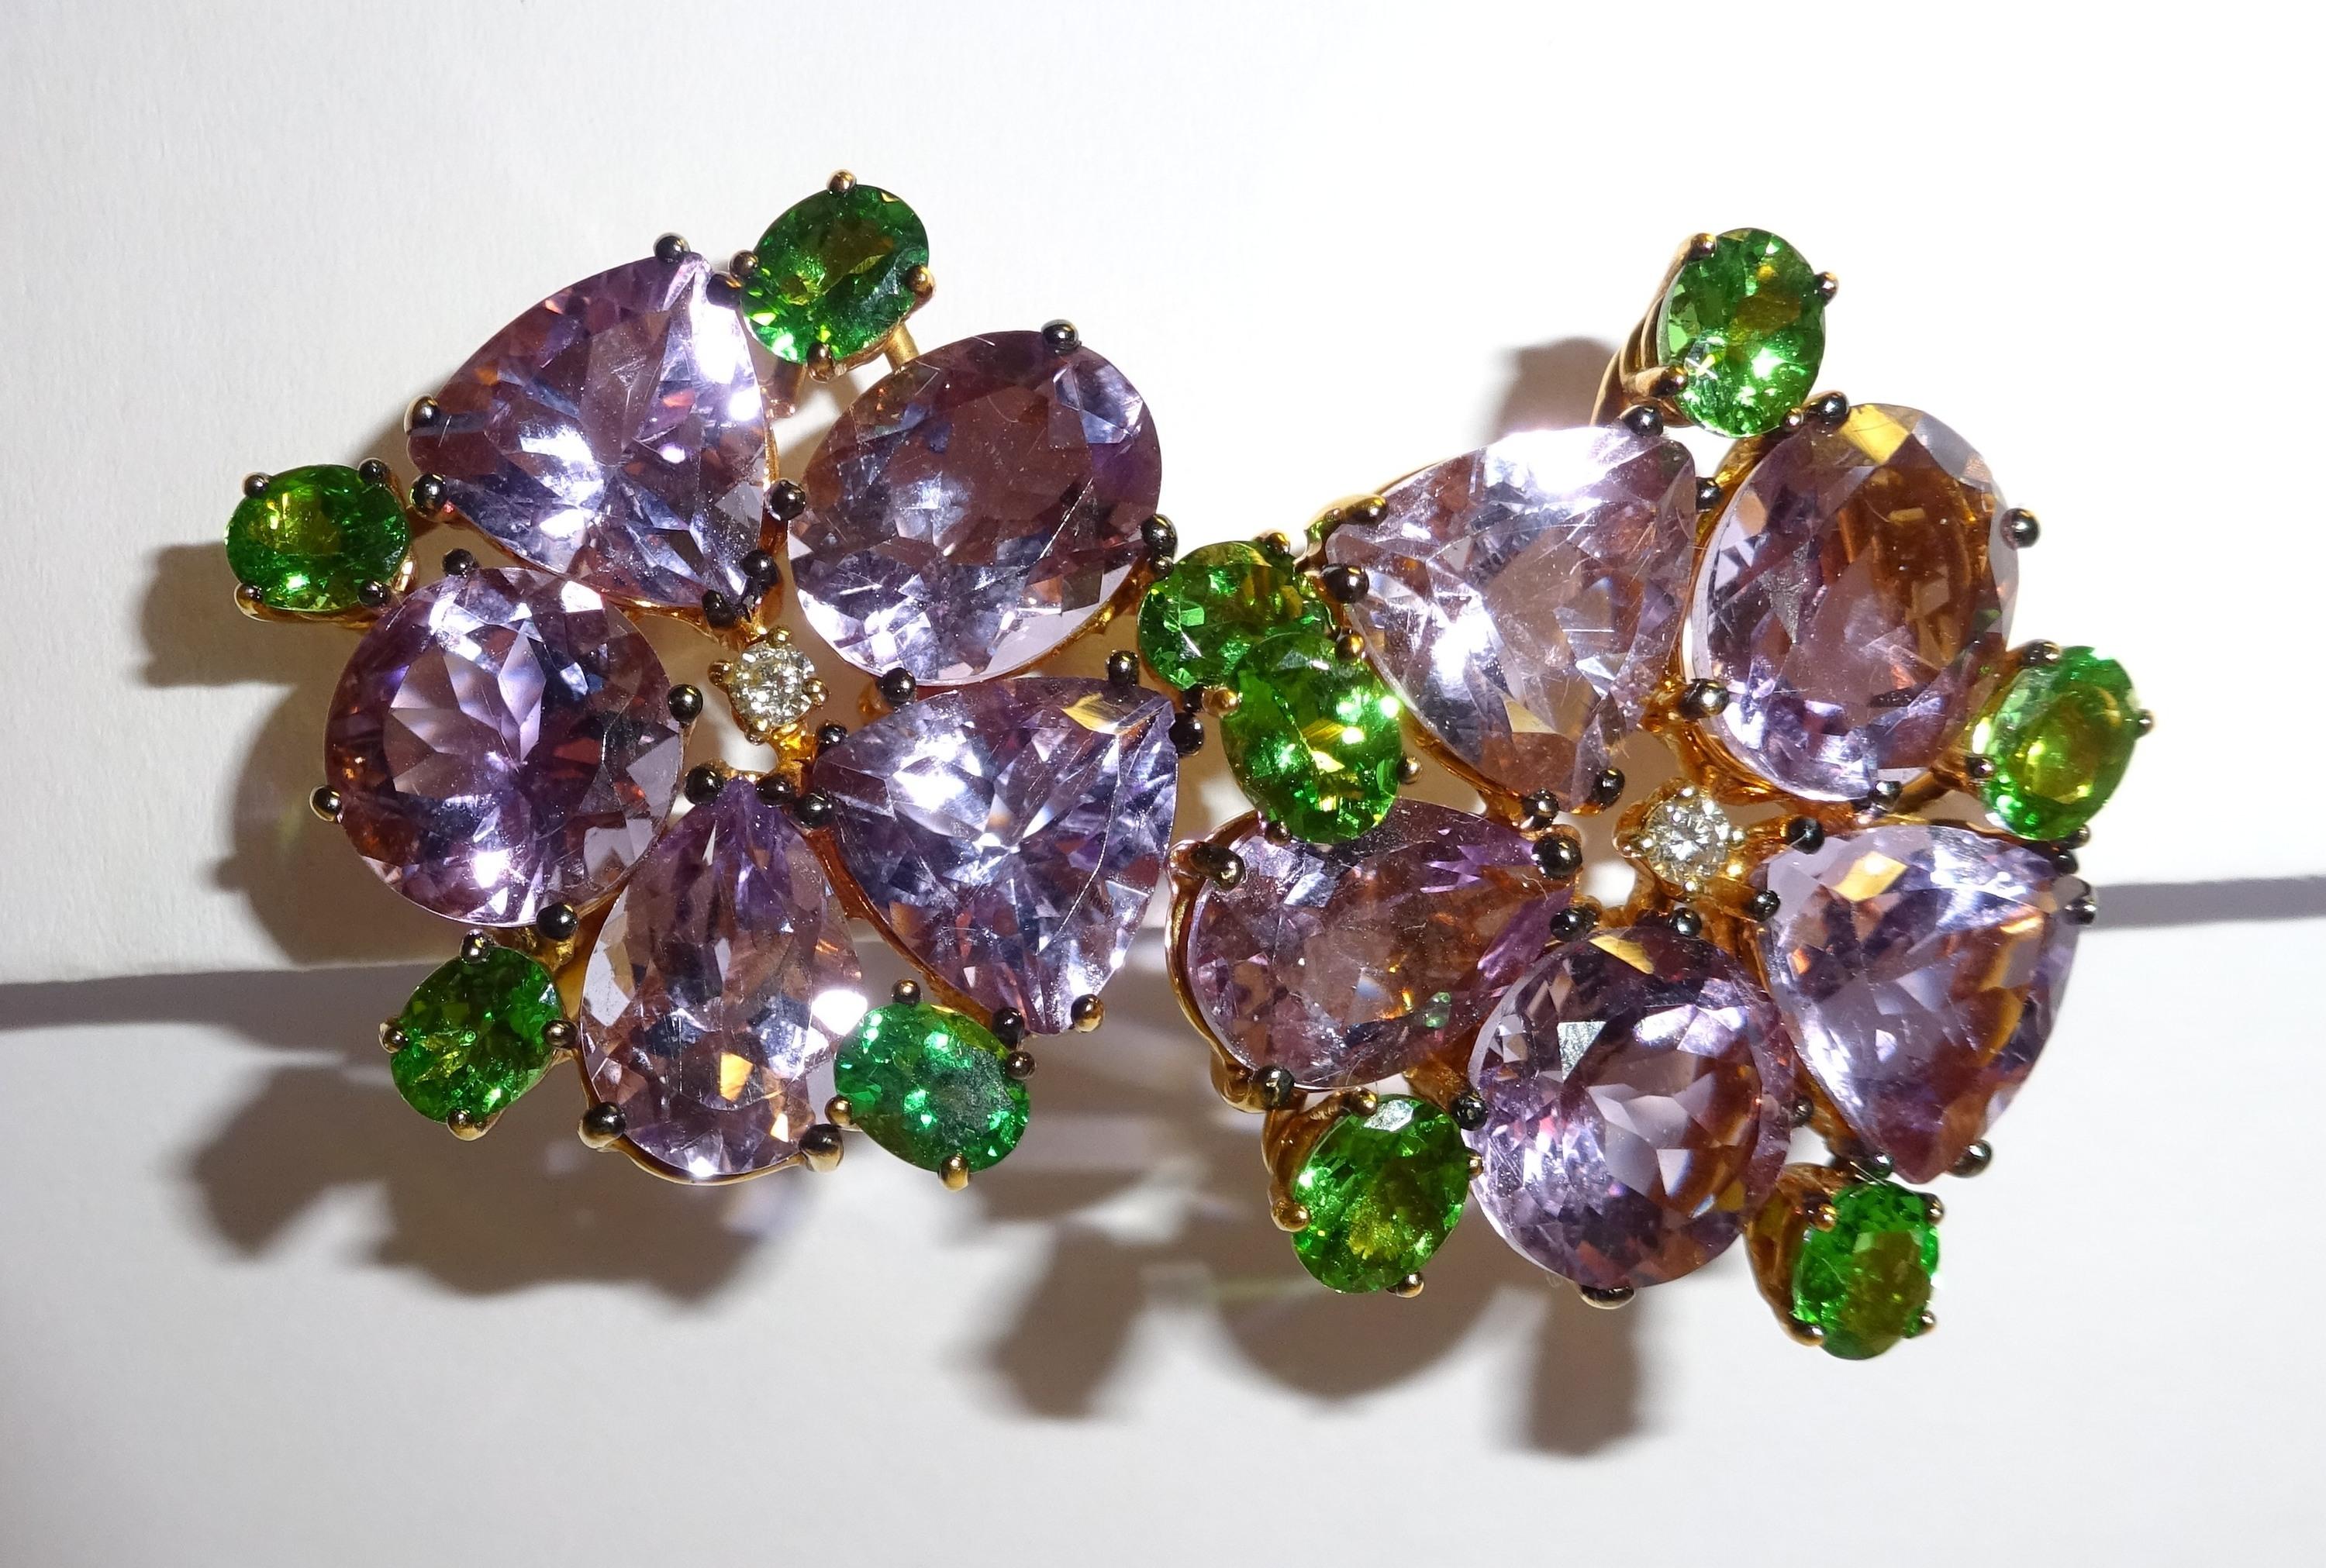 18 Karat Yellow Gold Diamond and Amethyst and Tsavorite Earrings

2 Diamonds 0.06  Carat
10 Amethist  38.69 Carat
10 Tsavotite 3.79 Carat

Founded in 1974, Gianni Lazzaro is a family-owned jewelery company based out of Düsseldorf, Germany.
Although